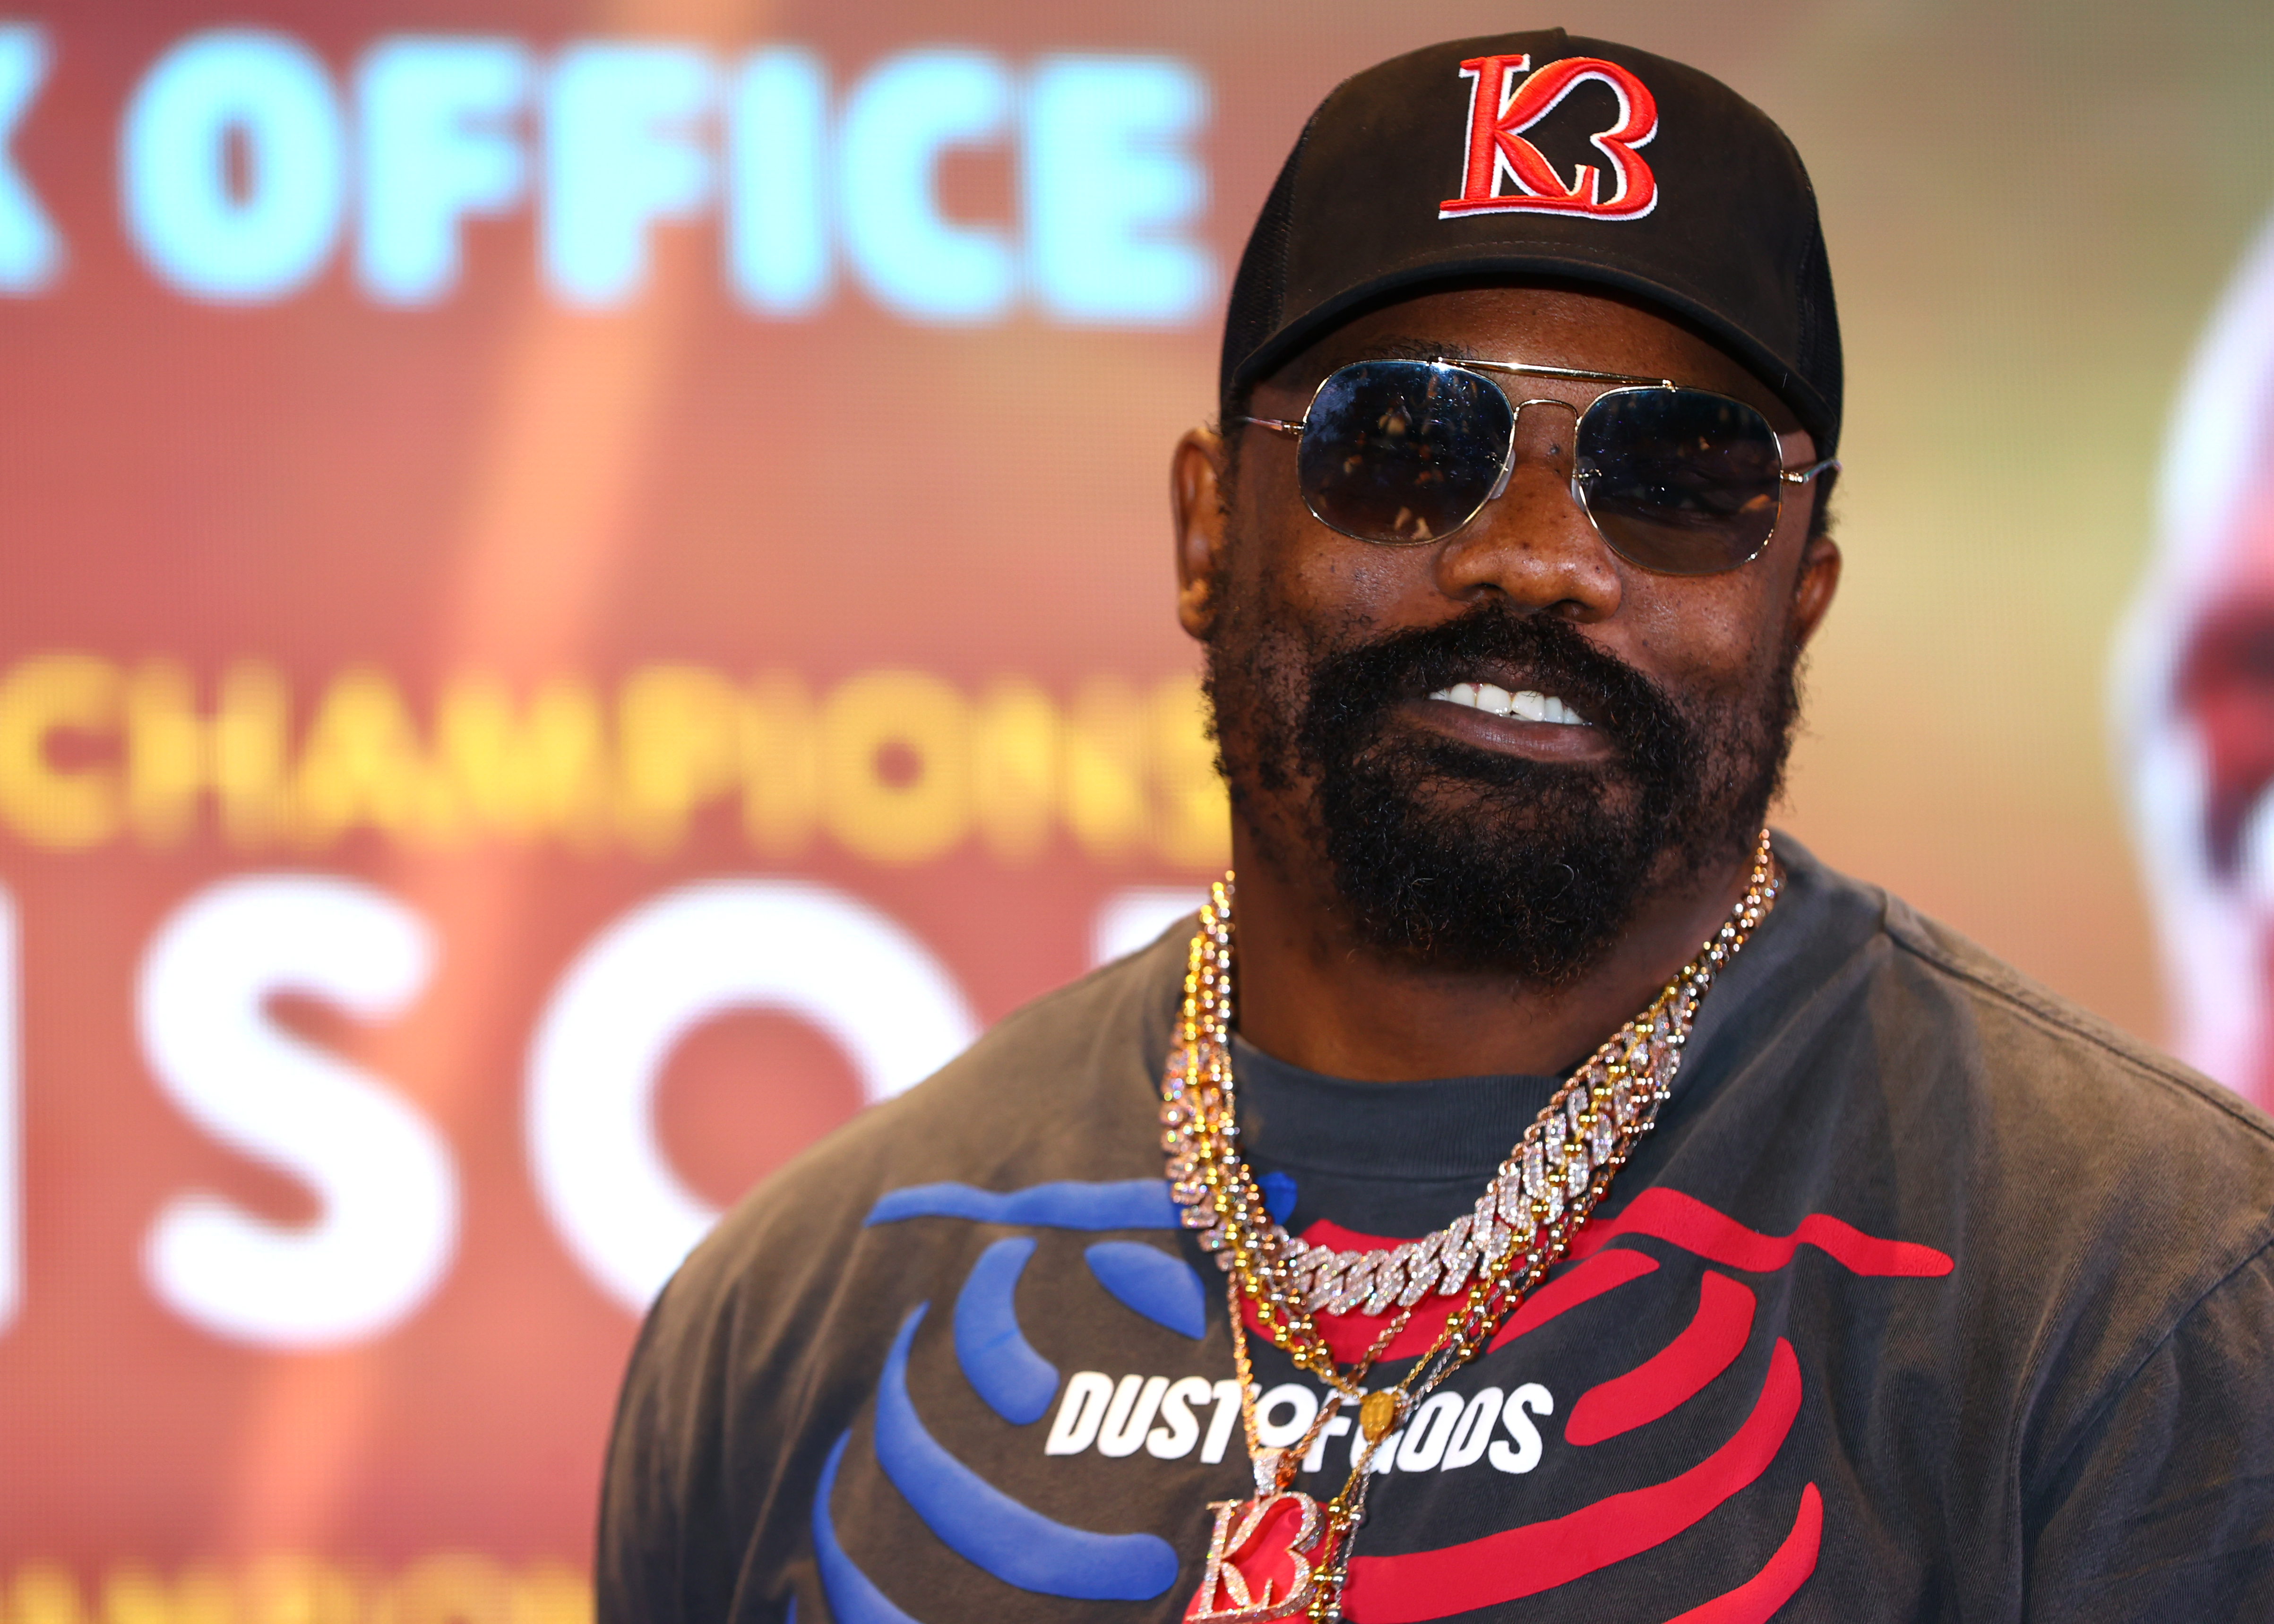 Derek Chisora is set to earn big money in a fight most don’t even believe should be happening.